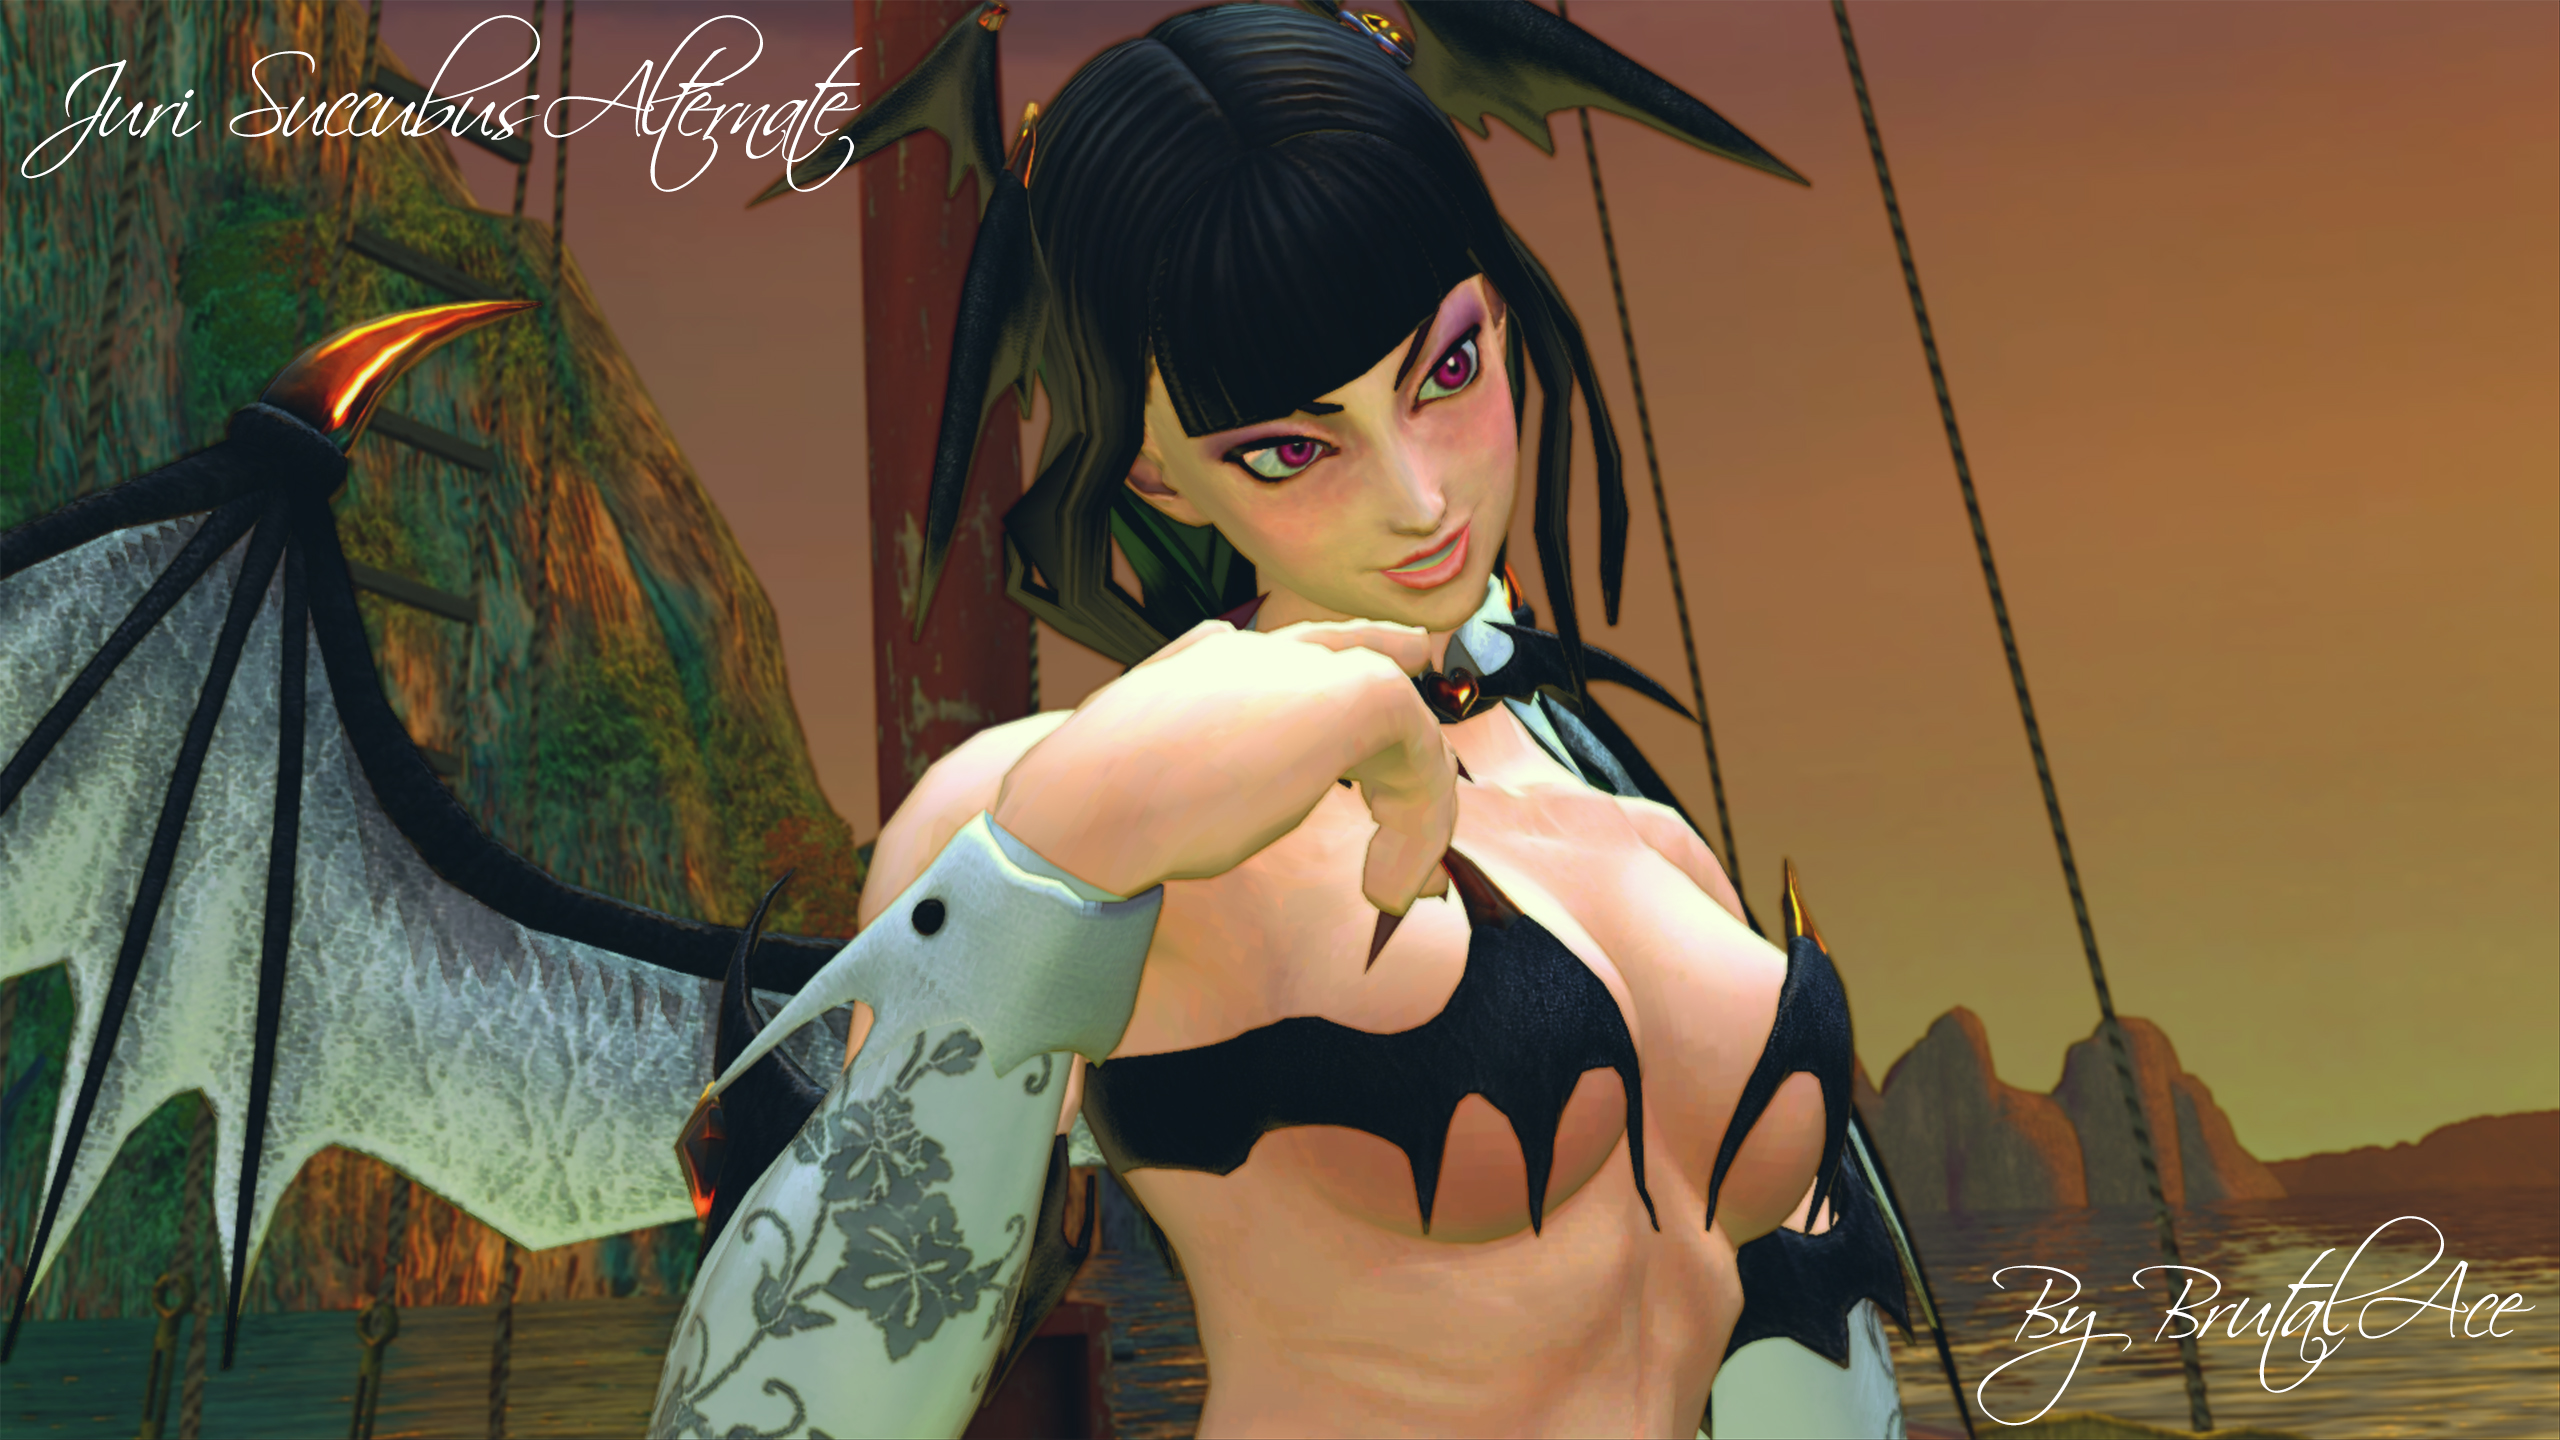 juri_succubus_alternate_by_brutalace_by_brutalace-d848hqe.jpg